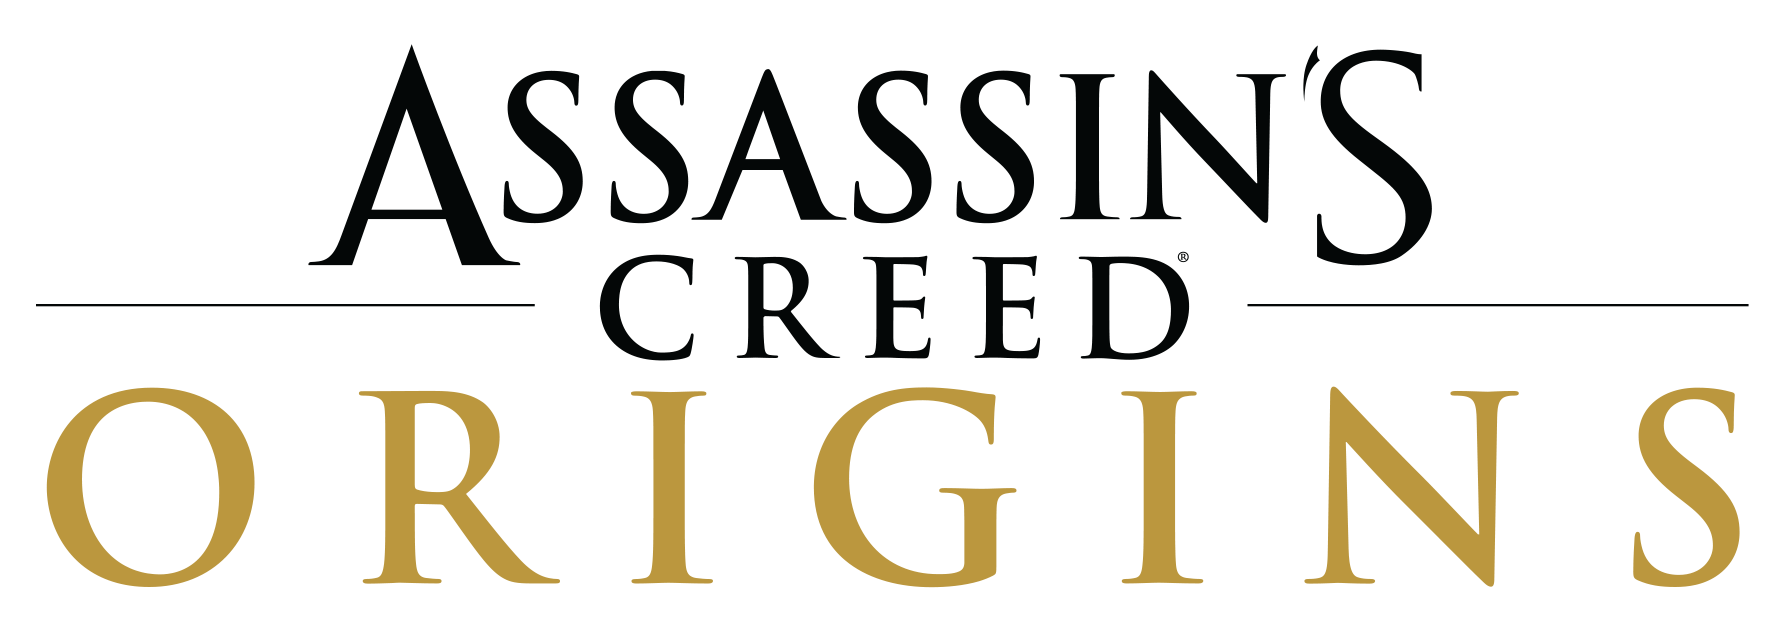 assassin_s_creed_origins_logo_text_png_official_by_irakli008-dbco1gt.png